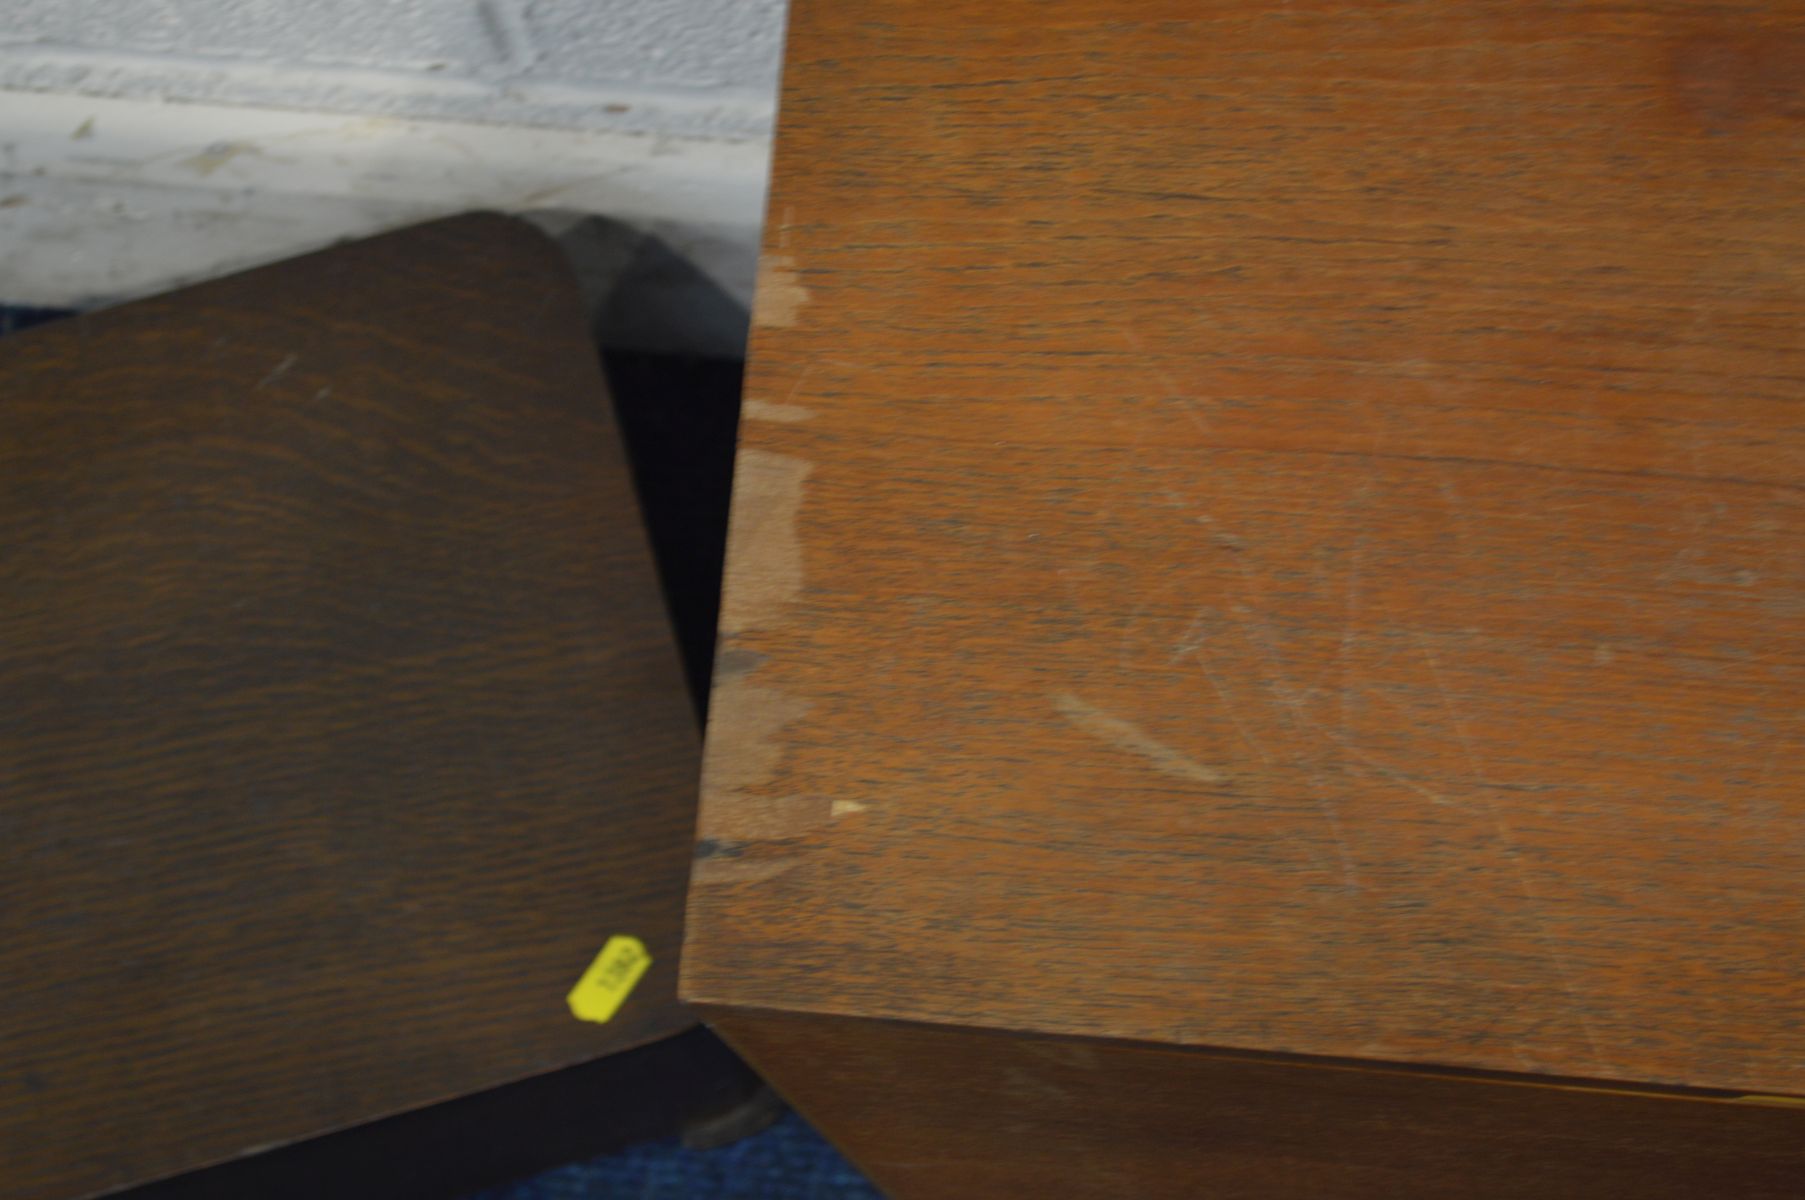 A MID 20TH CENTURY TEAK STEPPED WORK/SEWING BOX with two drawers (minor veneer damage) together with - Image 3 of 5